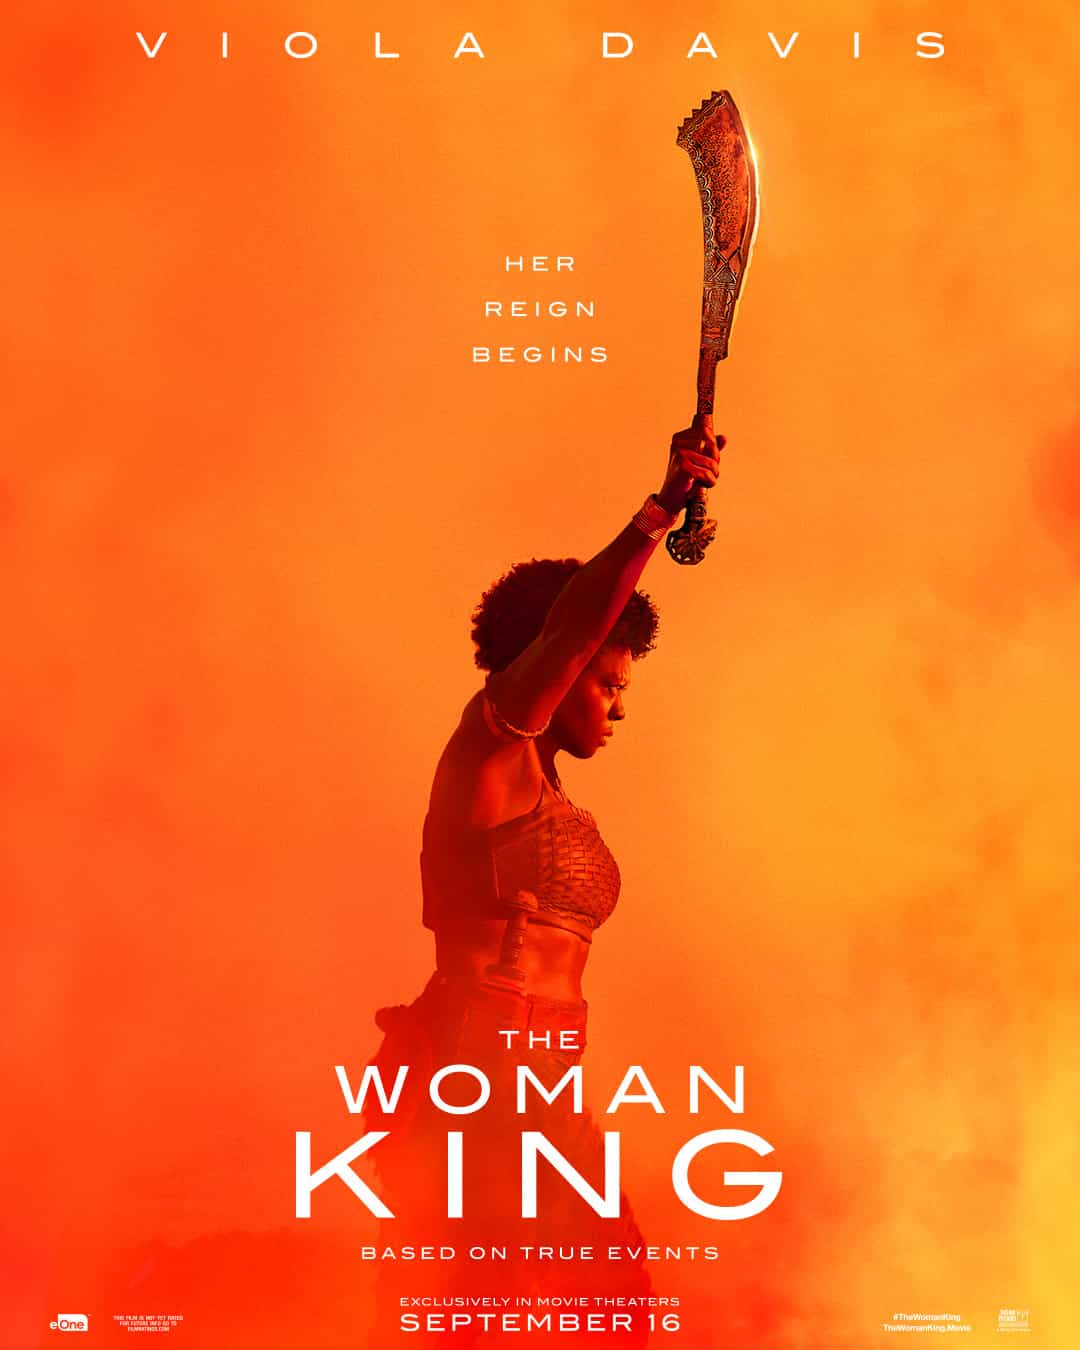 New poster released for The Woman King starring Lashana Lynch - movie UK release date 7th October 2022 #thewomanking